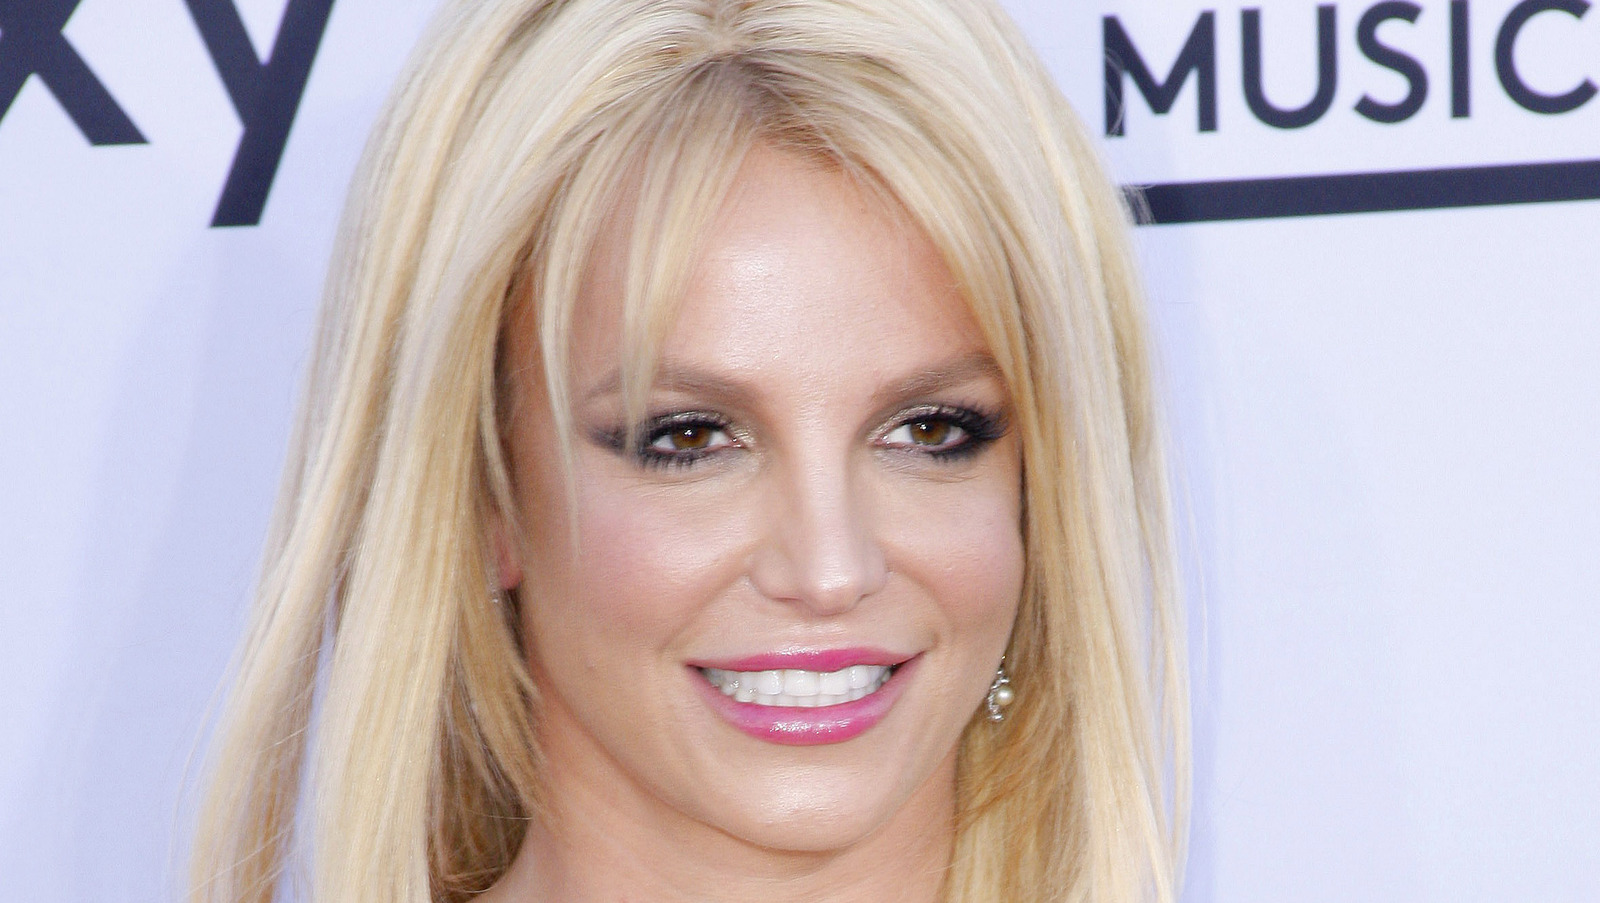 Britney Spears' Manager Just Quit. Here's What We Know